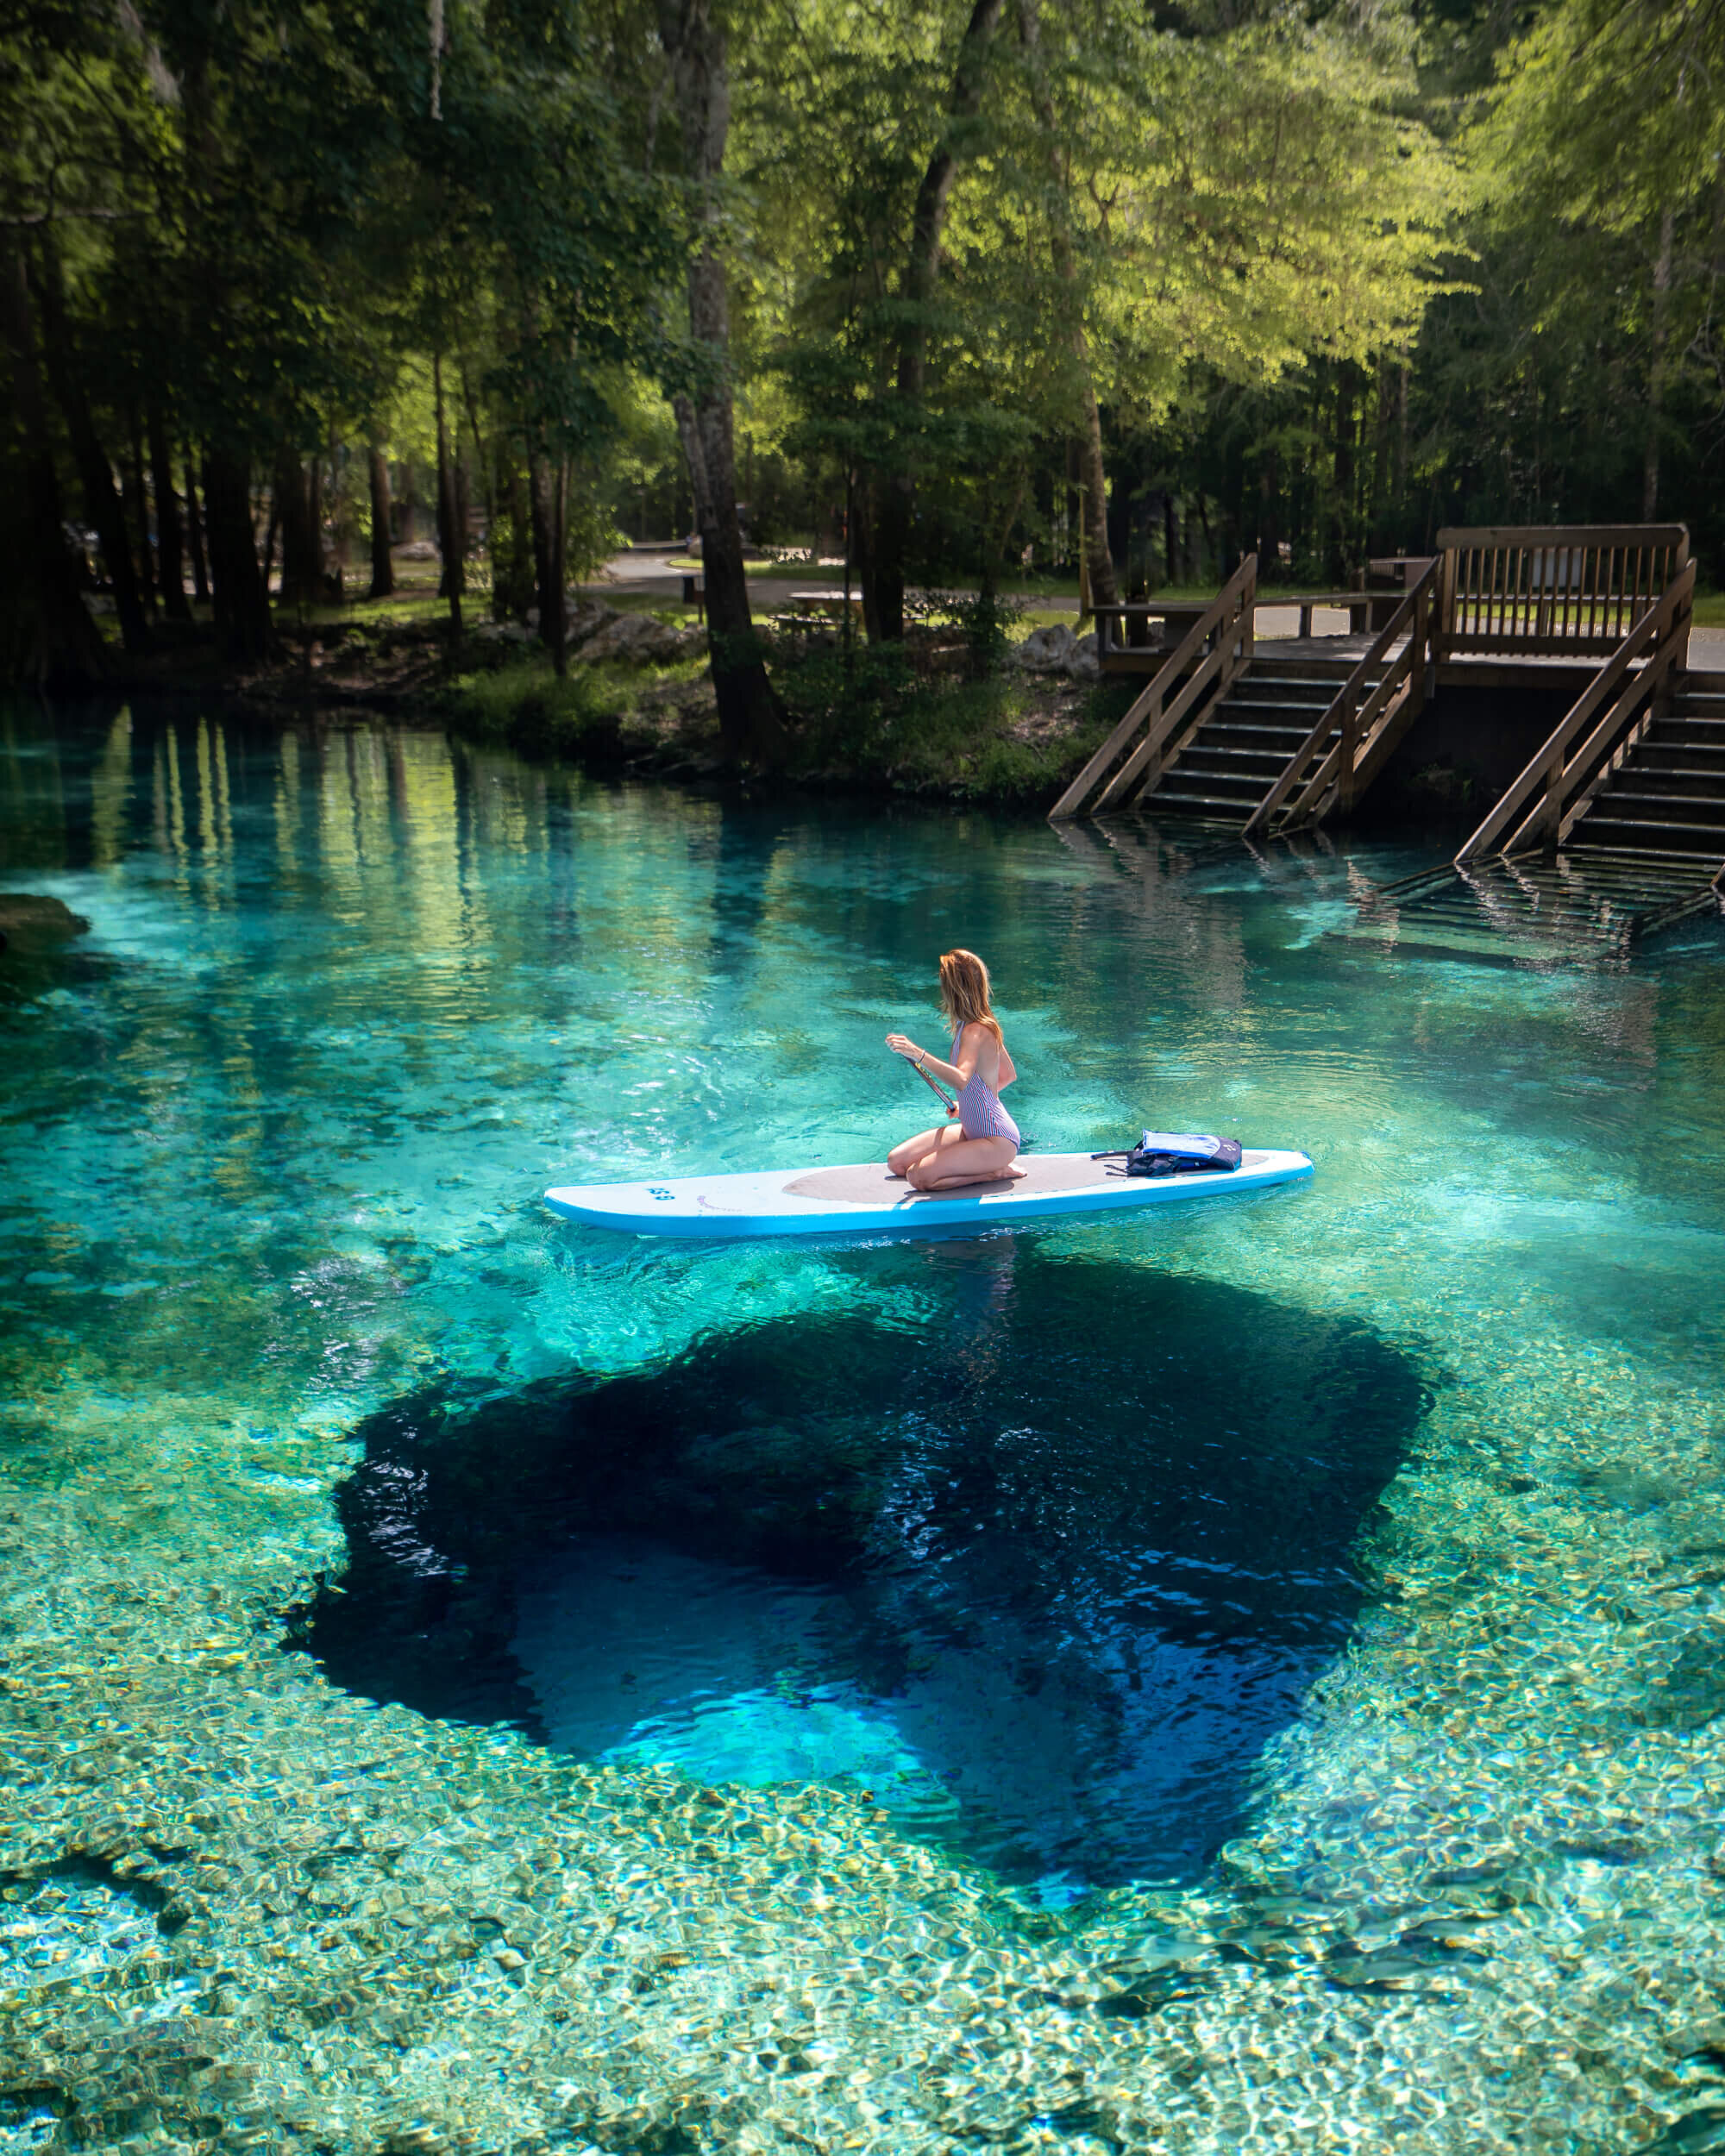 Paddle boarding at Ginnie Springs in Florida.